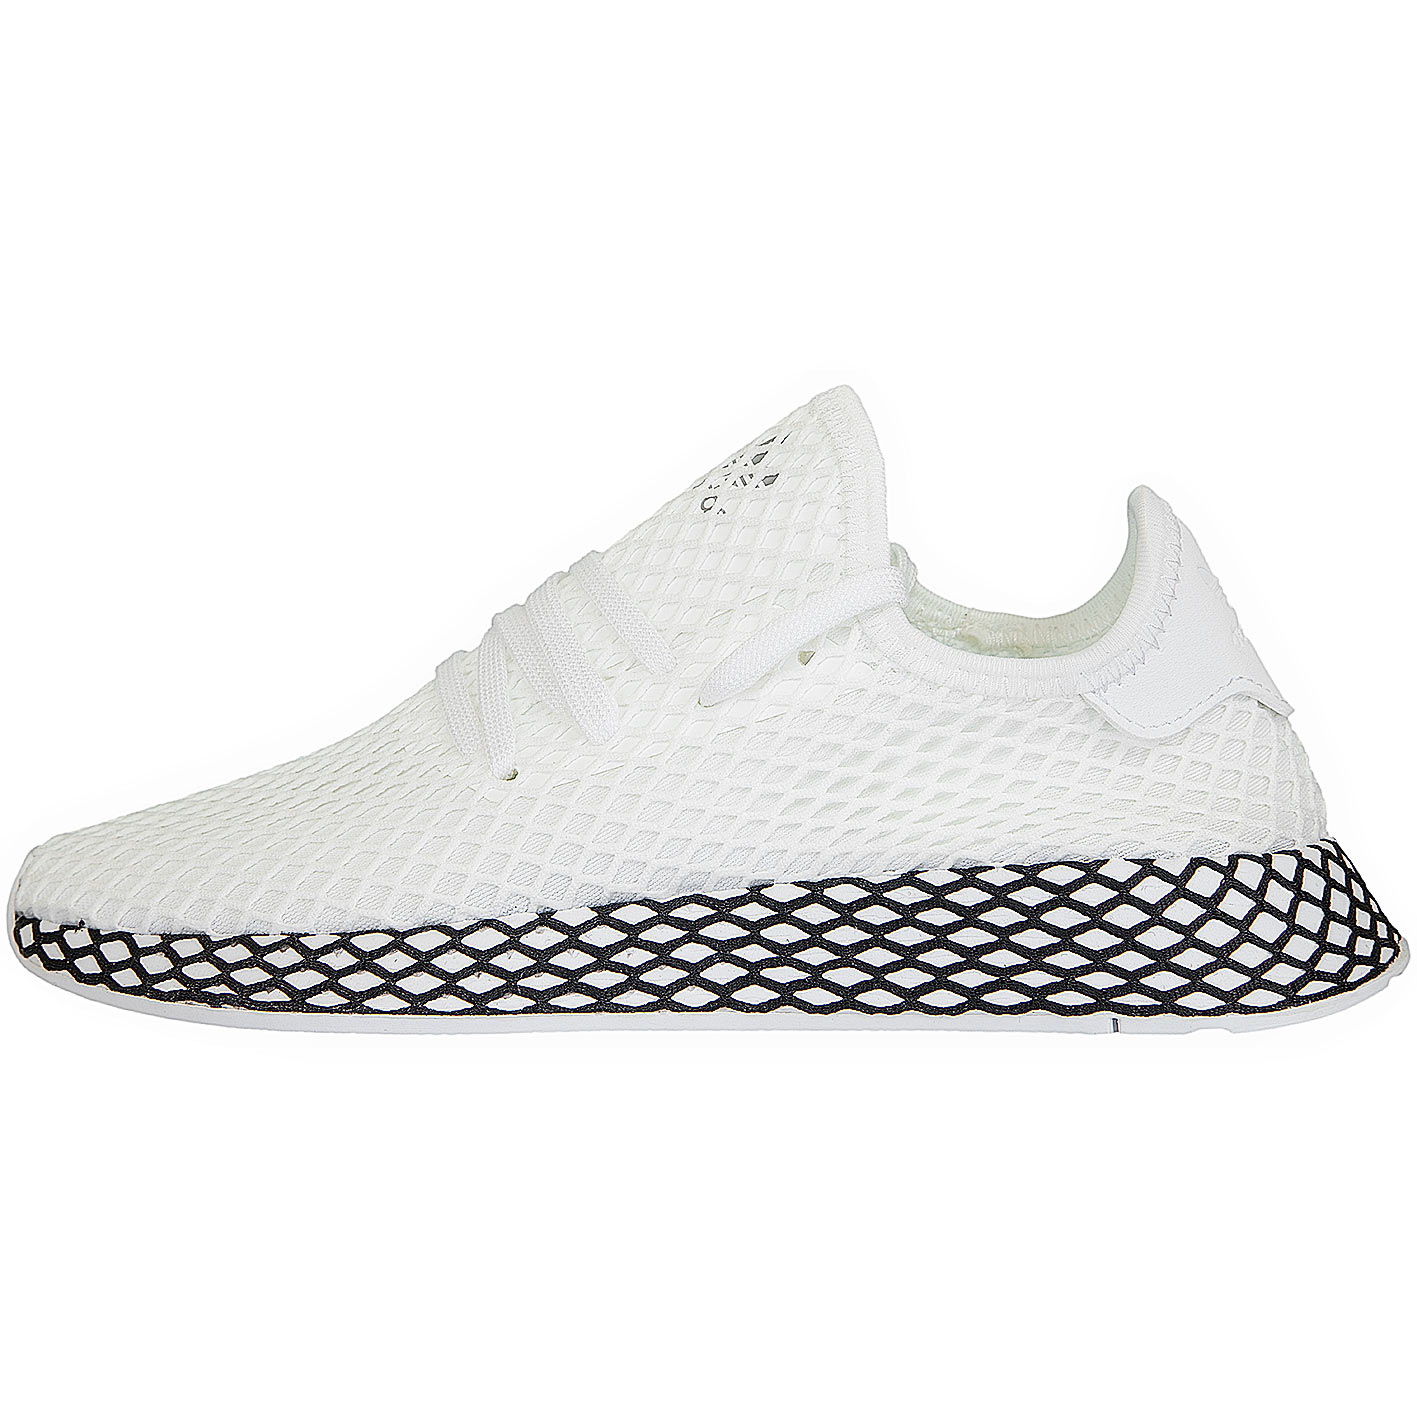 adidas deerupt weiß Clothing and Fashion | Dresses, Denim, Tops, Shoes and  More | Free Shipping